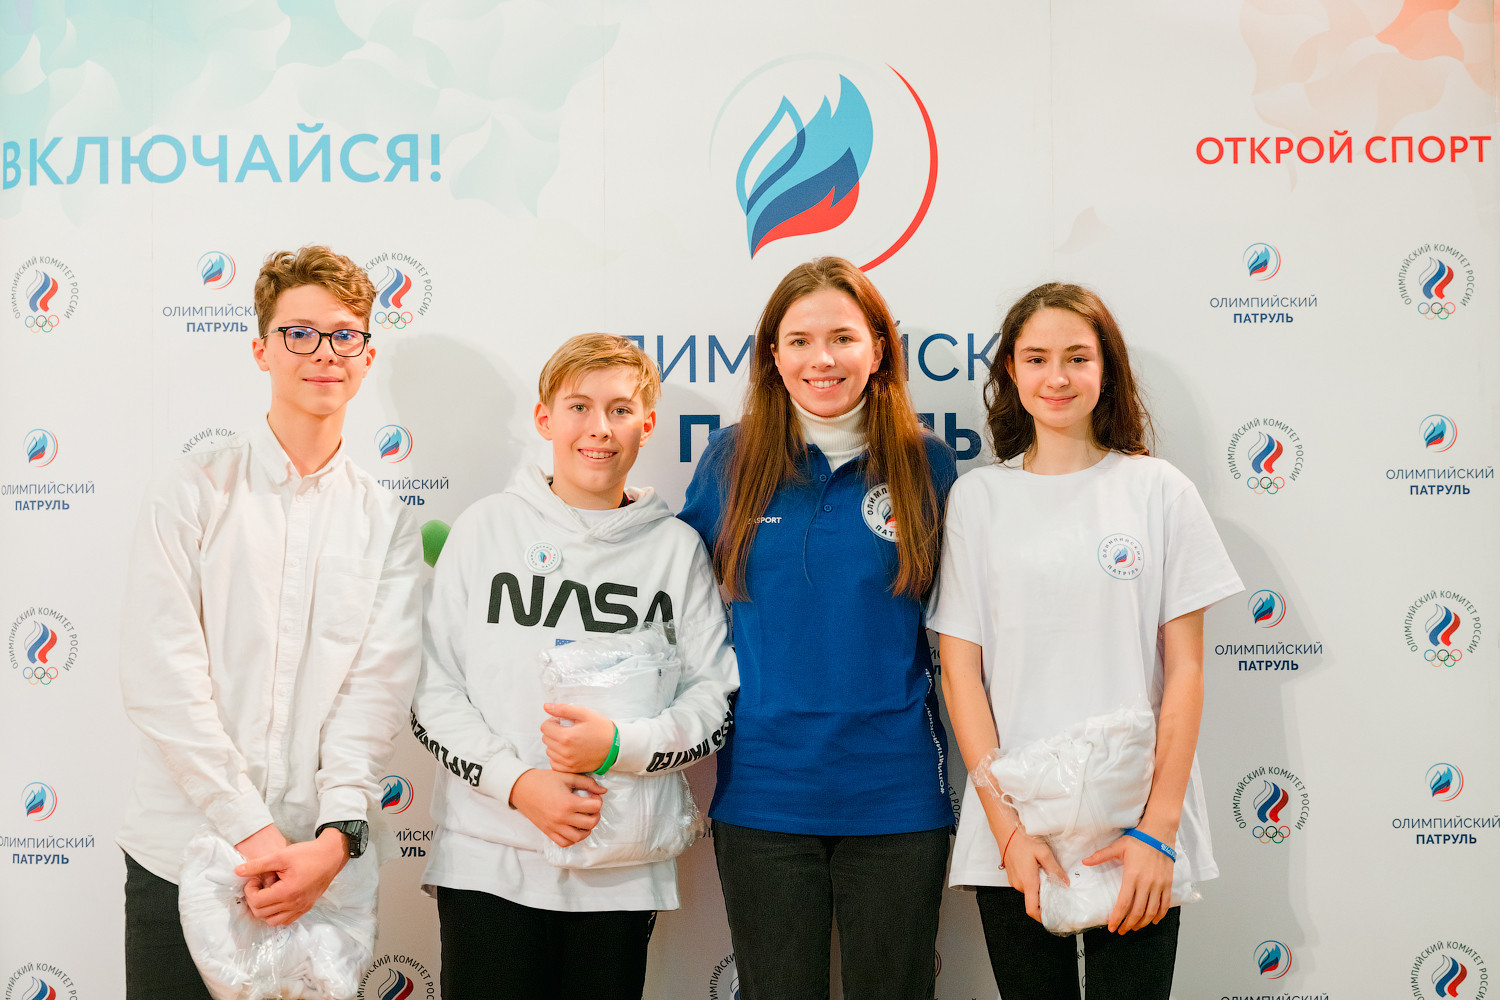 Russian Olympic fencer Yuliya Gavrilova visited a school as part of the Olympic Patrol ©ROC